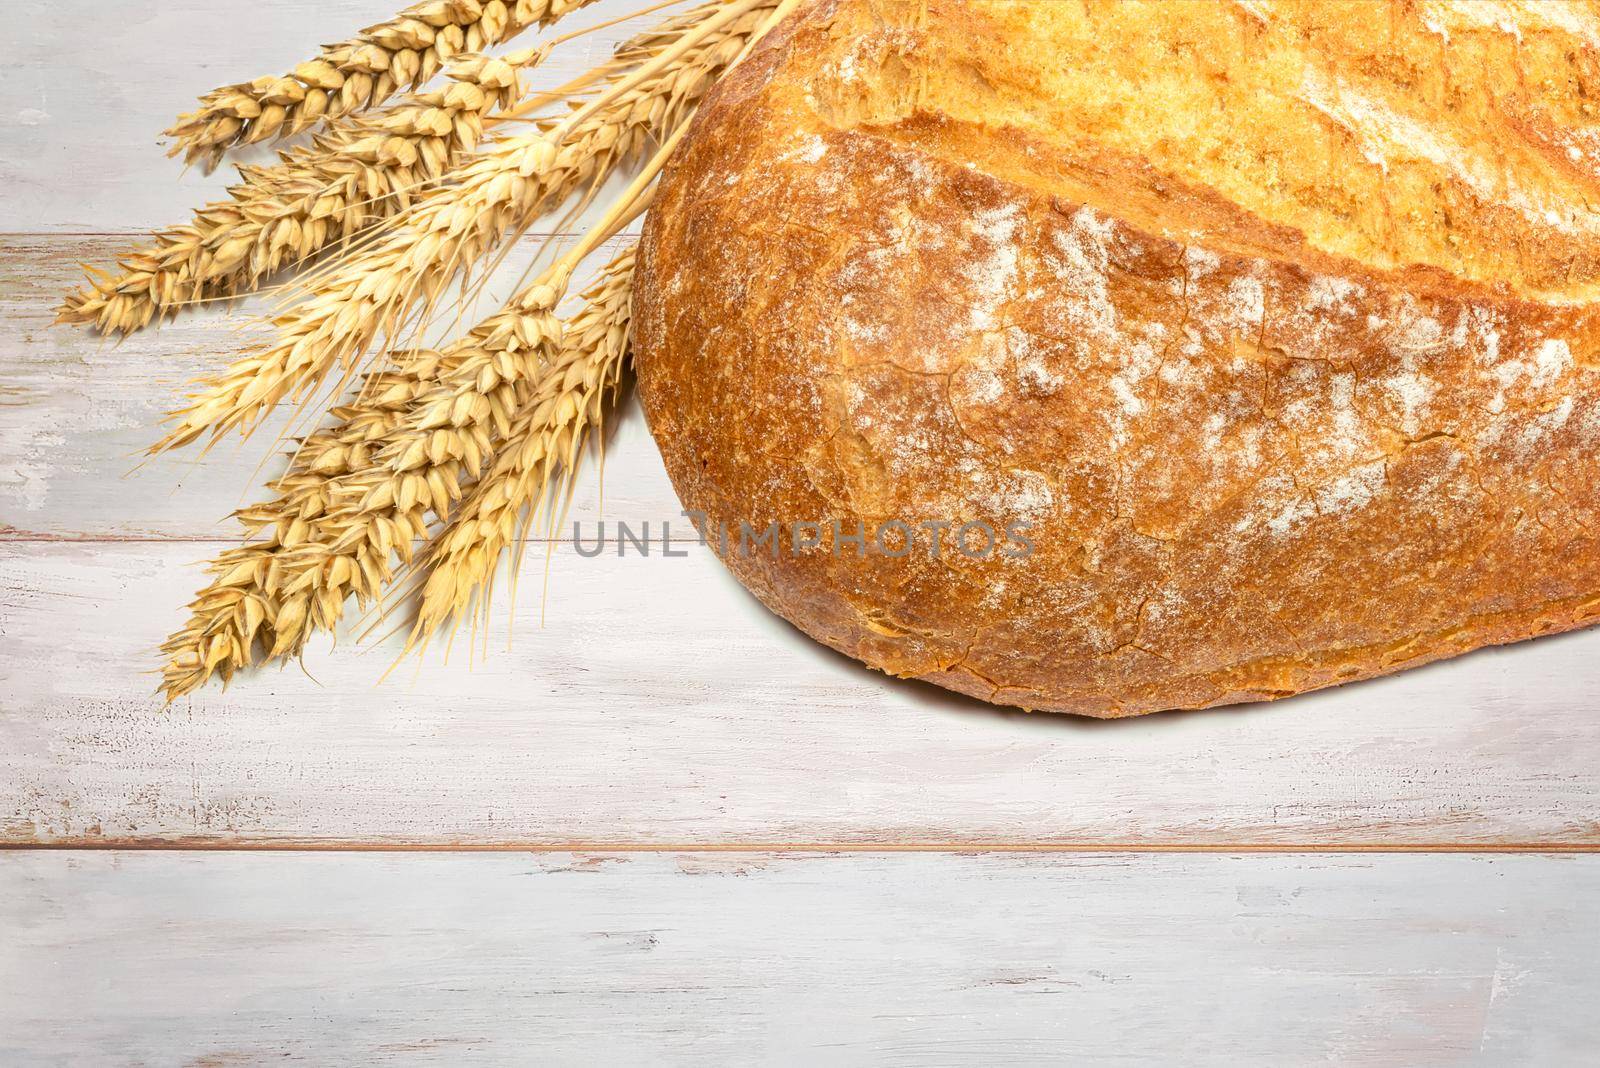 Fresh loaf of bread with wheat grains on a wooden vintage table in close up.